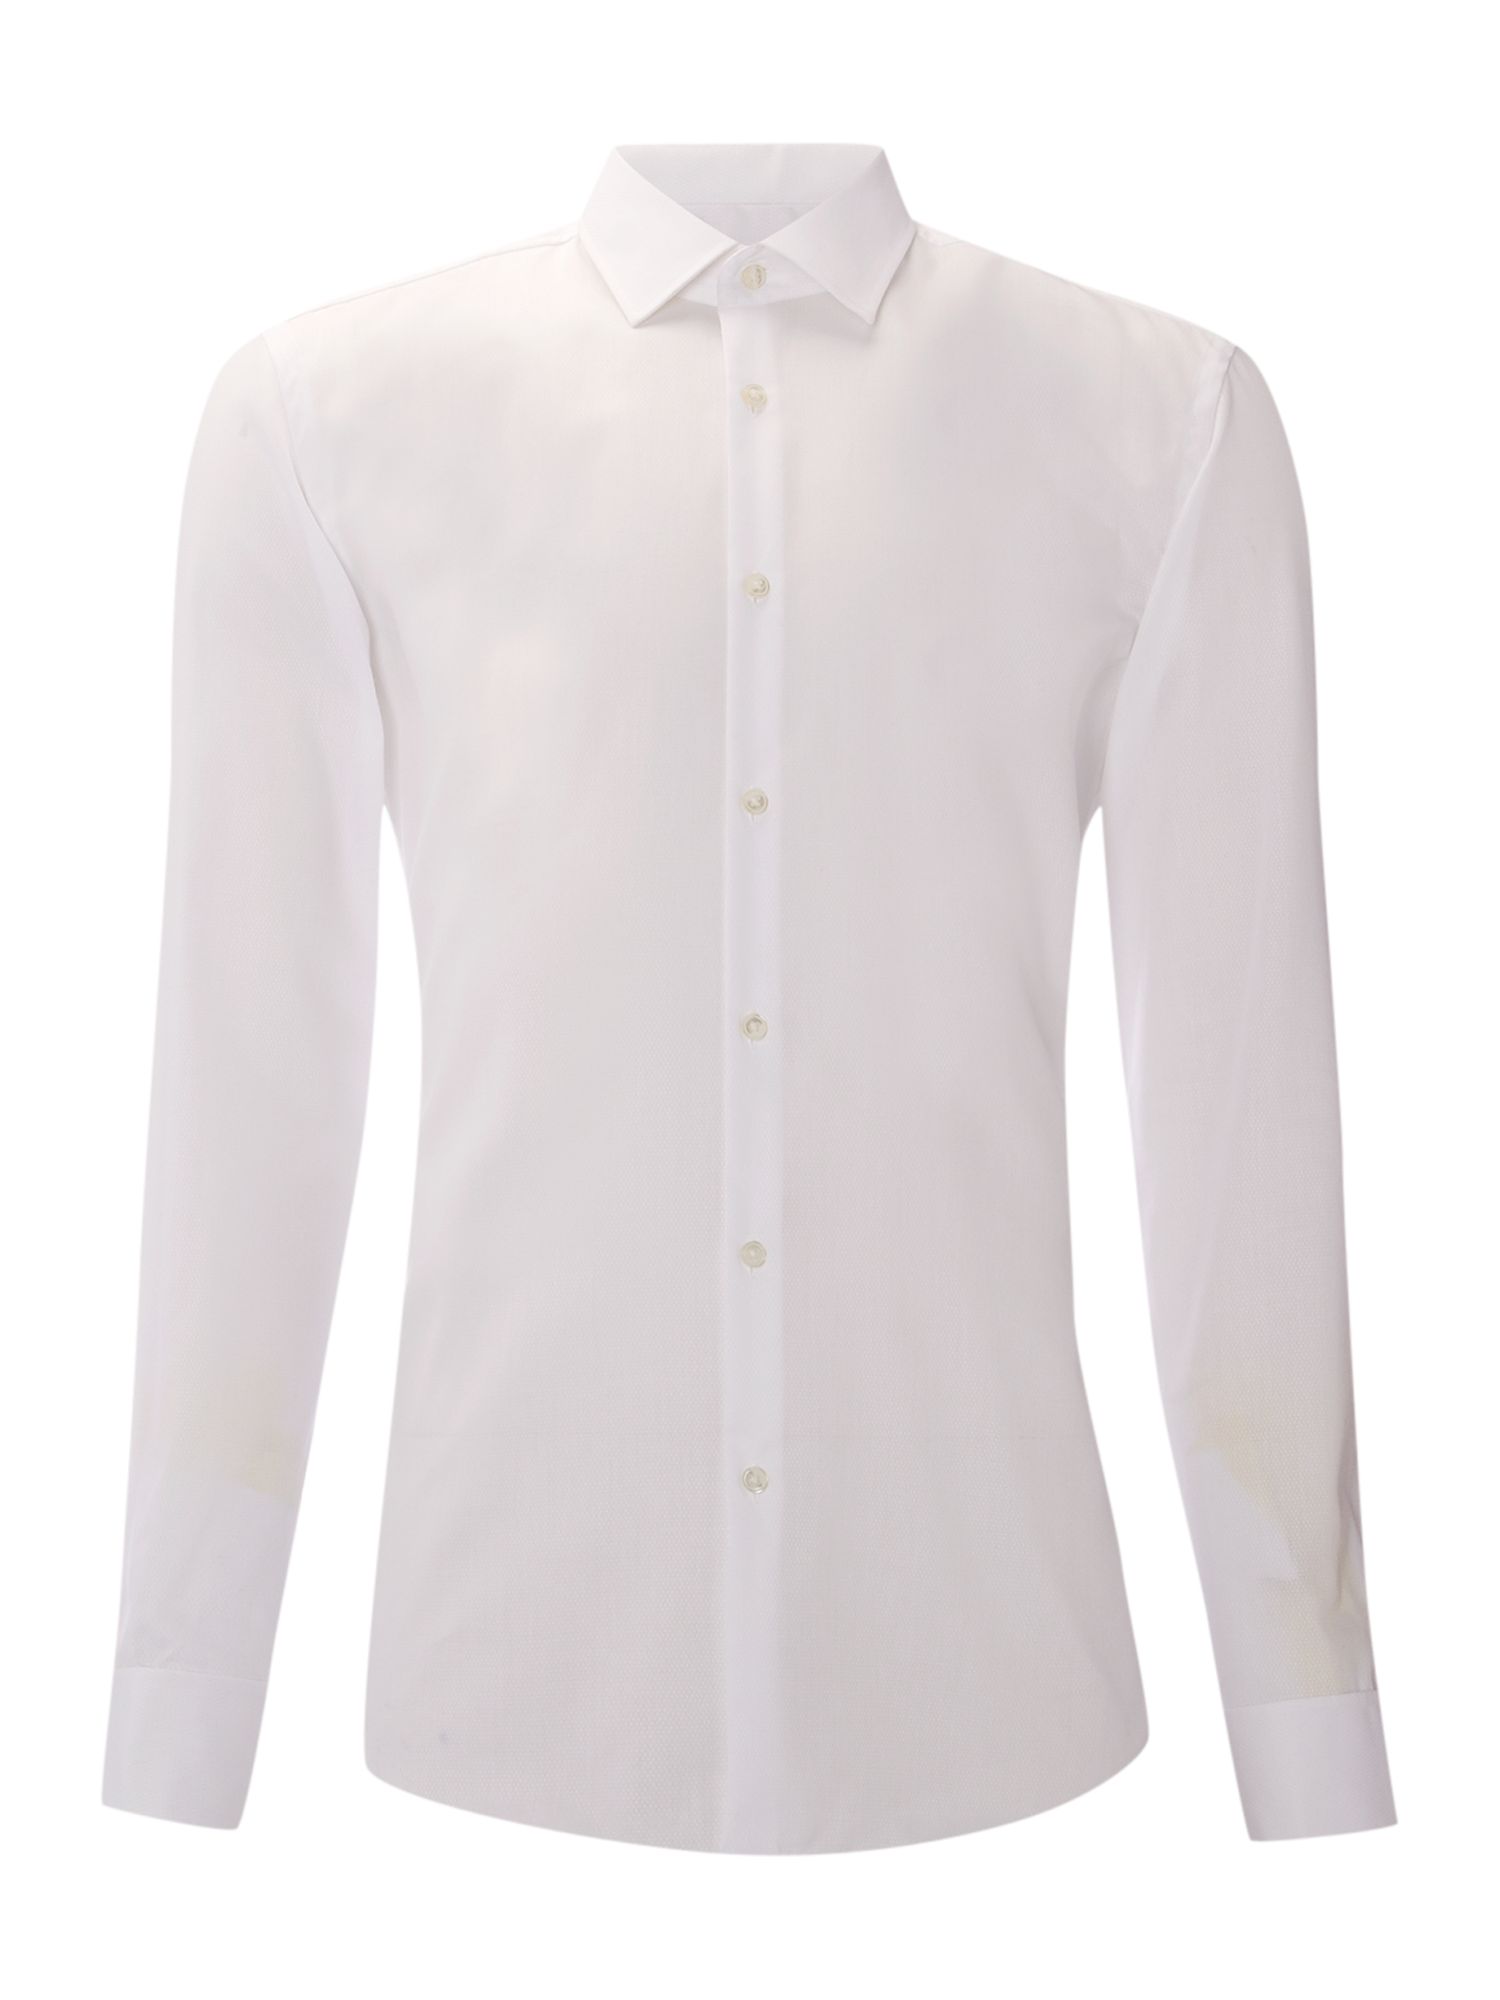 Hugo Boss Long Sleeve Pattern Jaques Cotton Shirt in White for Men | Lyst